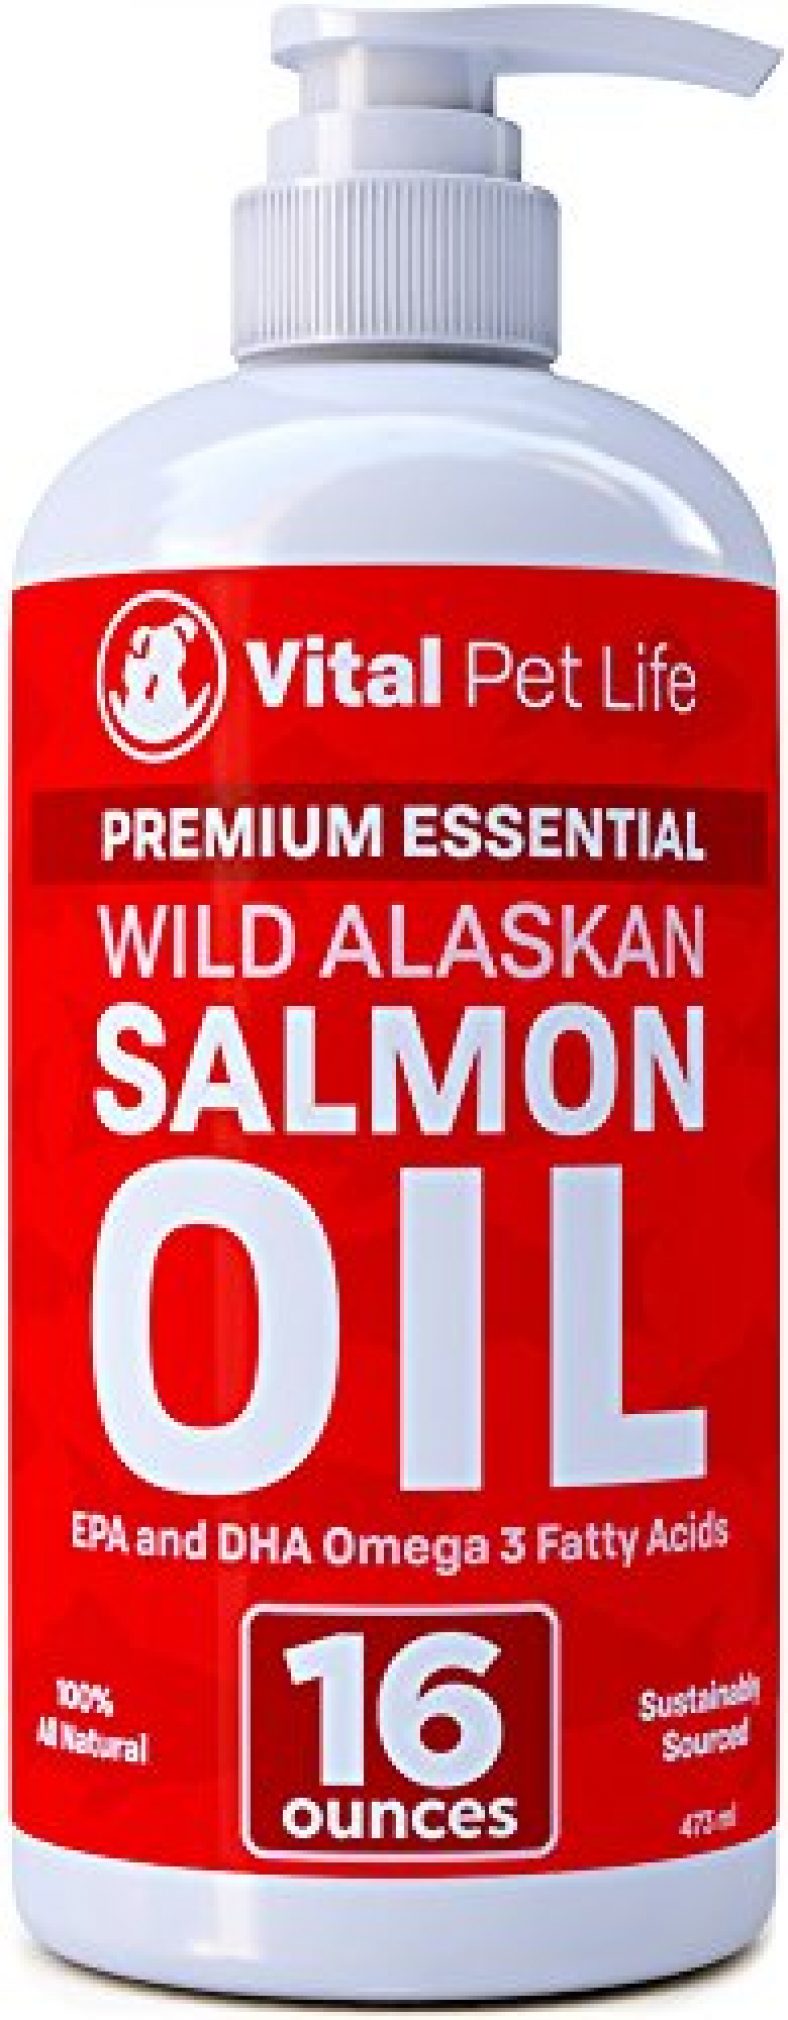 Salmon Oil for Dogs, Cats, and Horses, Fish Oil Omega 3 Food Supplement